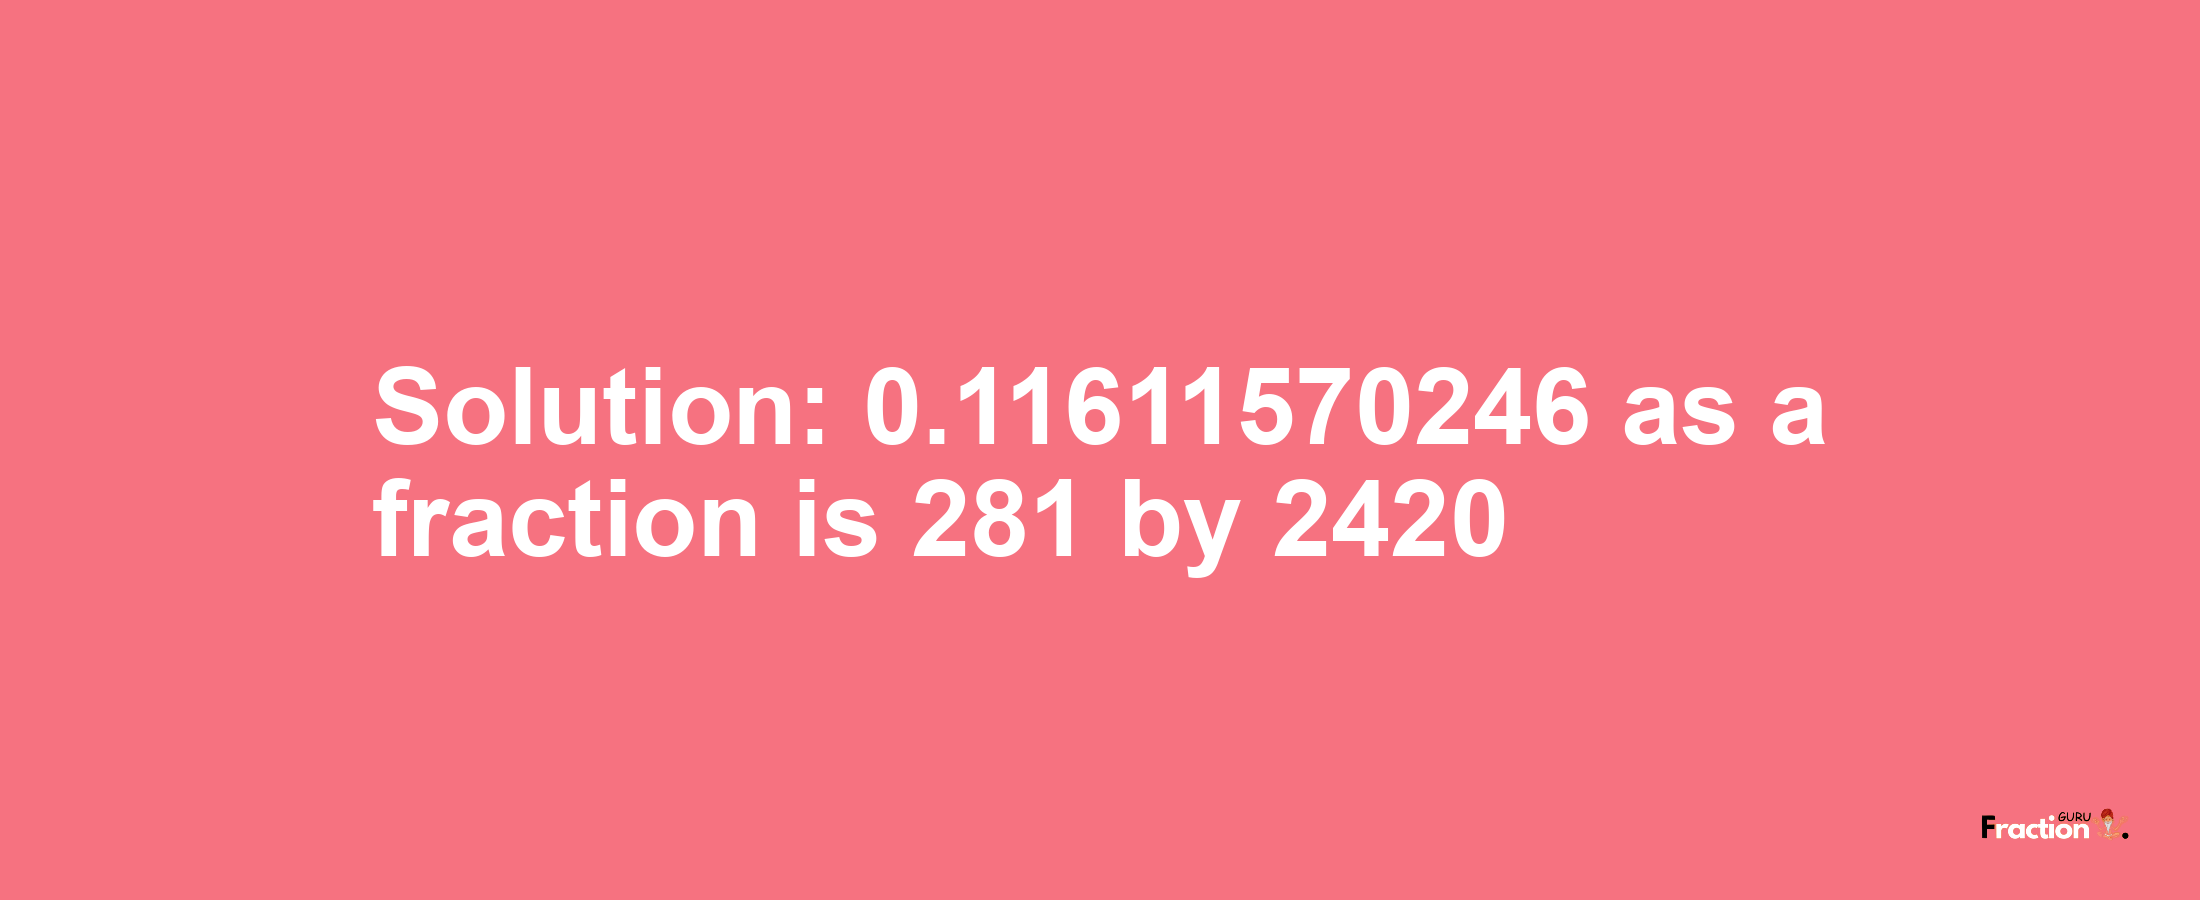 Solution:0.11611570246 as a fraction is 281/2420